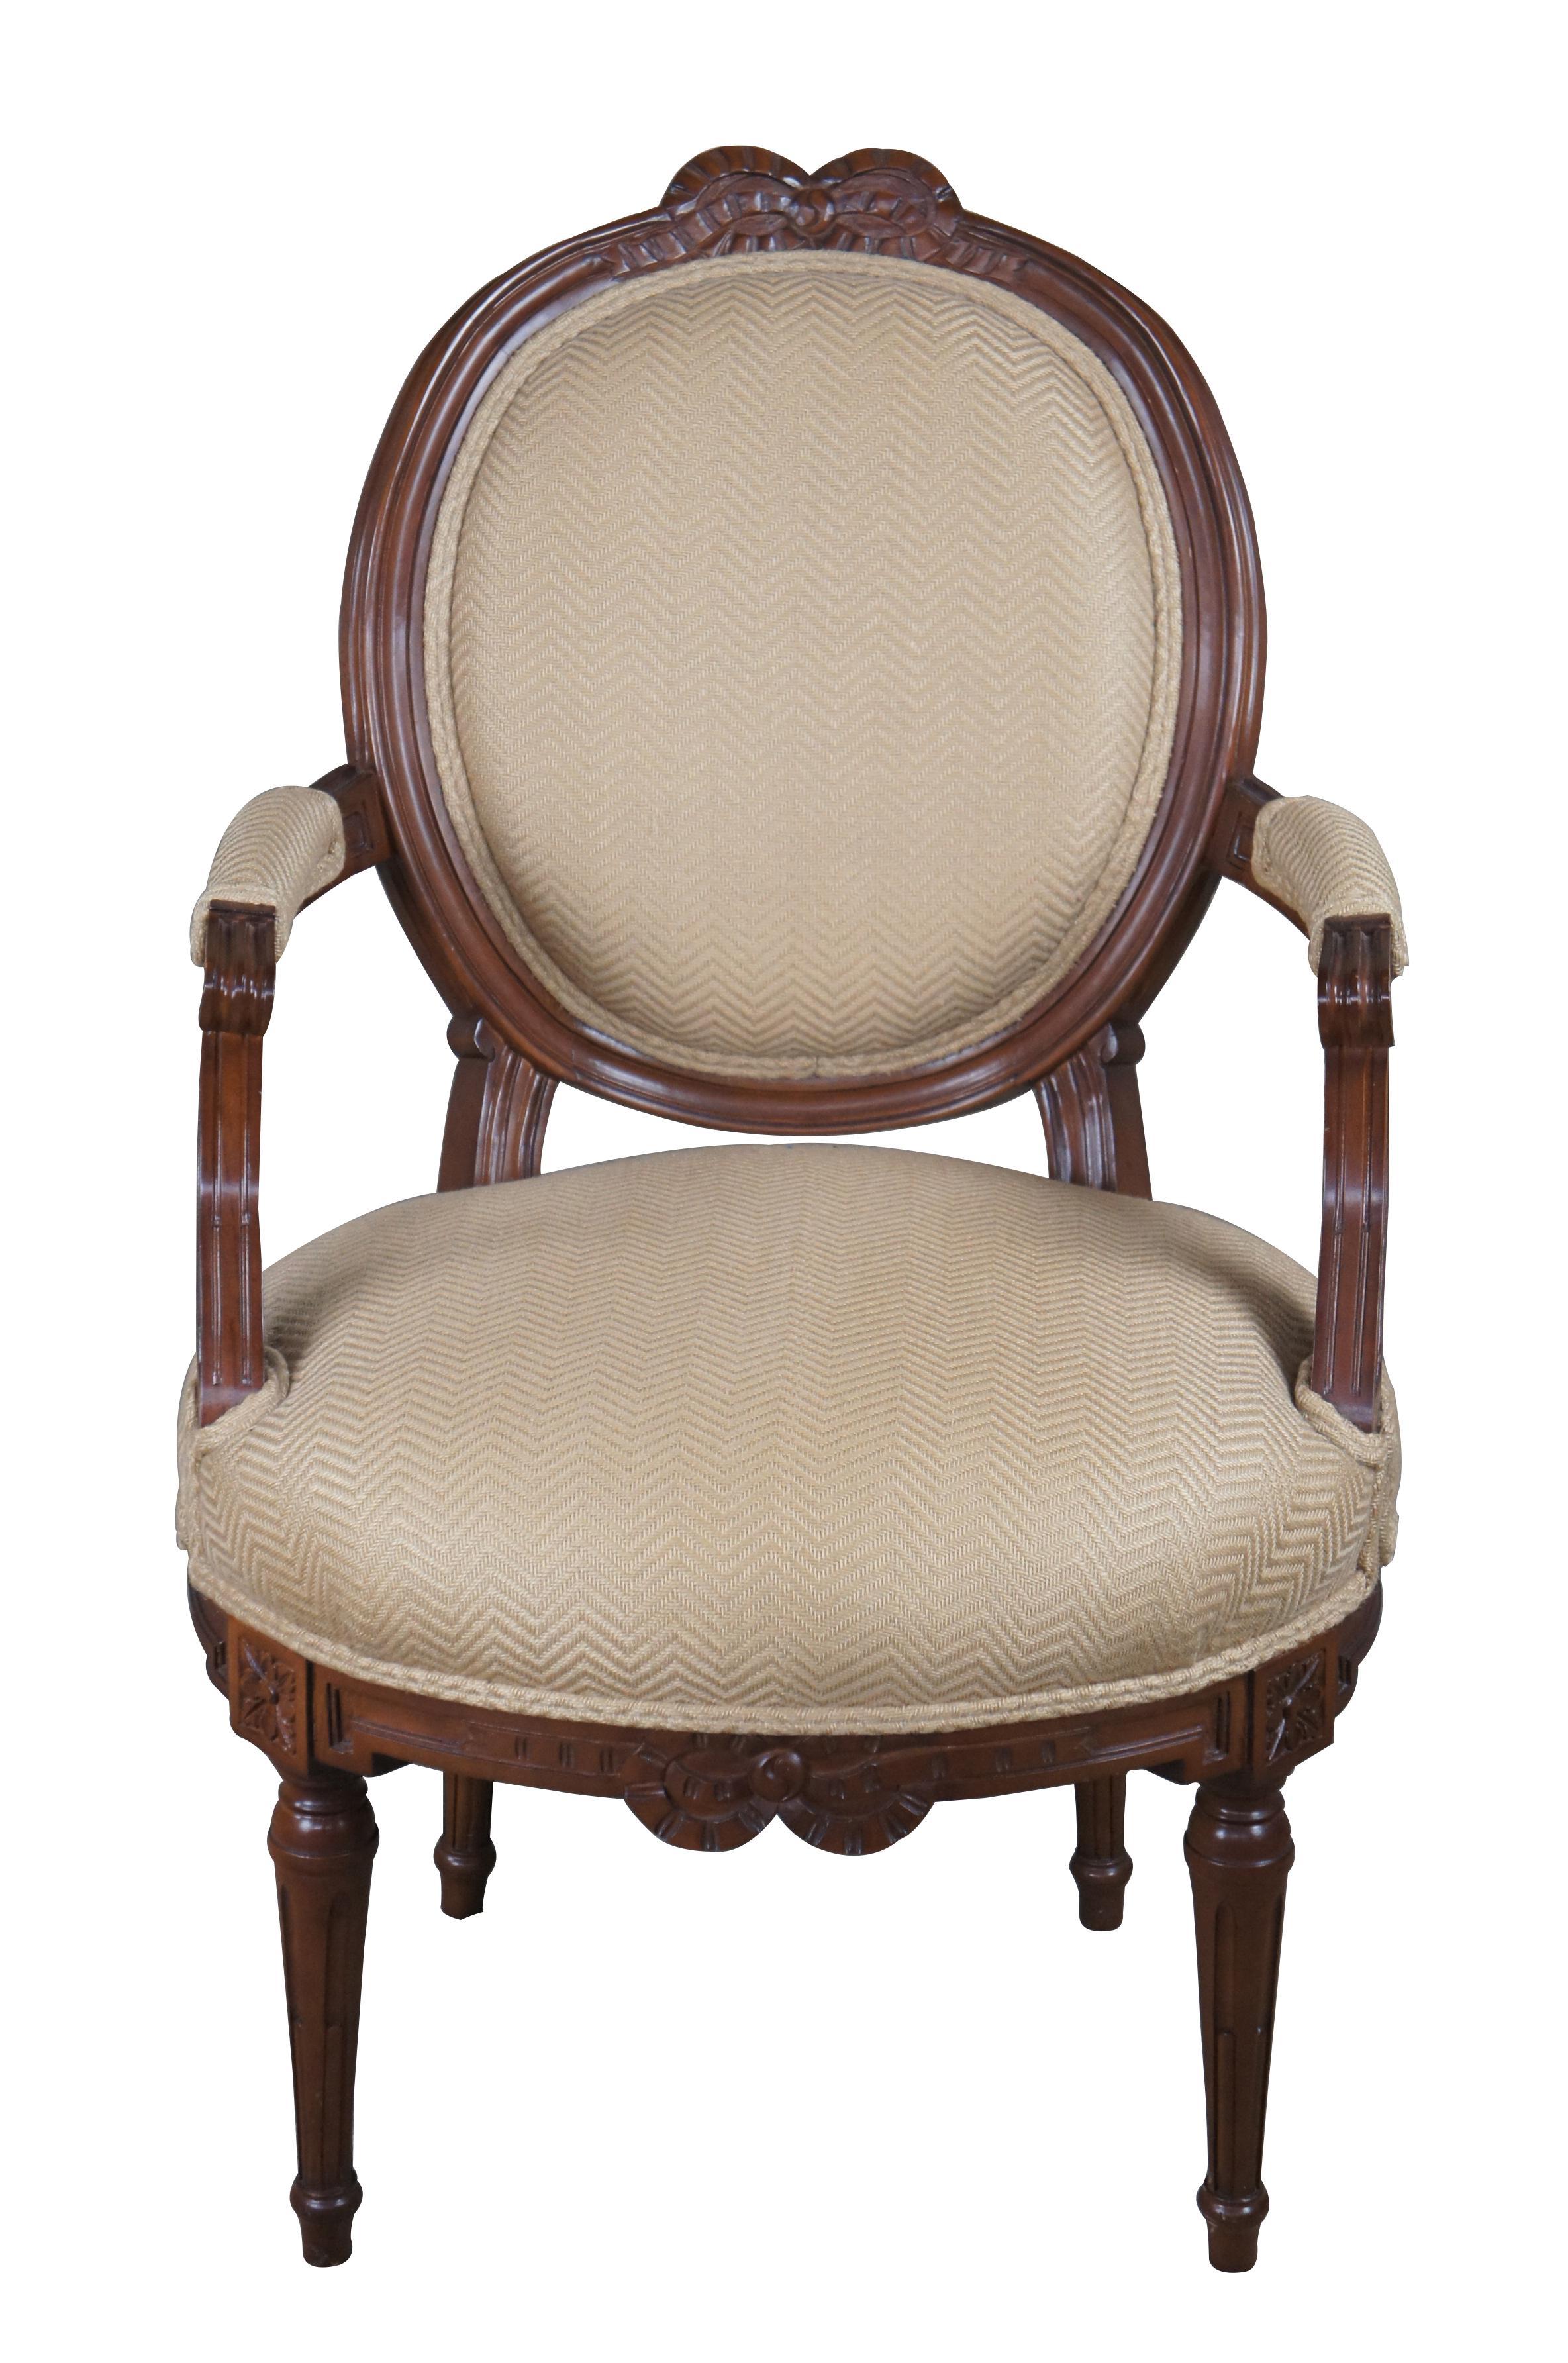 Vintage Baker Furniture Mcmillen collection fauteuil balloon back armchair featuring Louis XVI / Neoclassical styling with carved ribbons, floral medallions, and tapered fluted legs.

Dimensions:
24